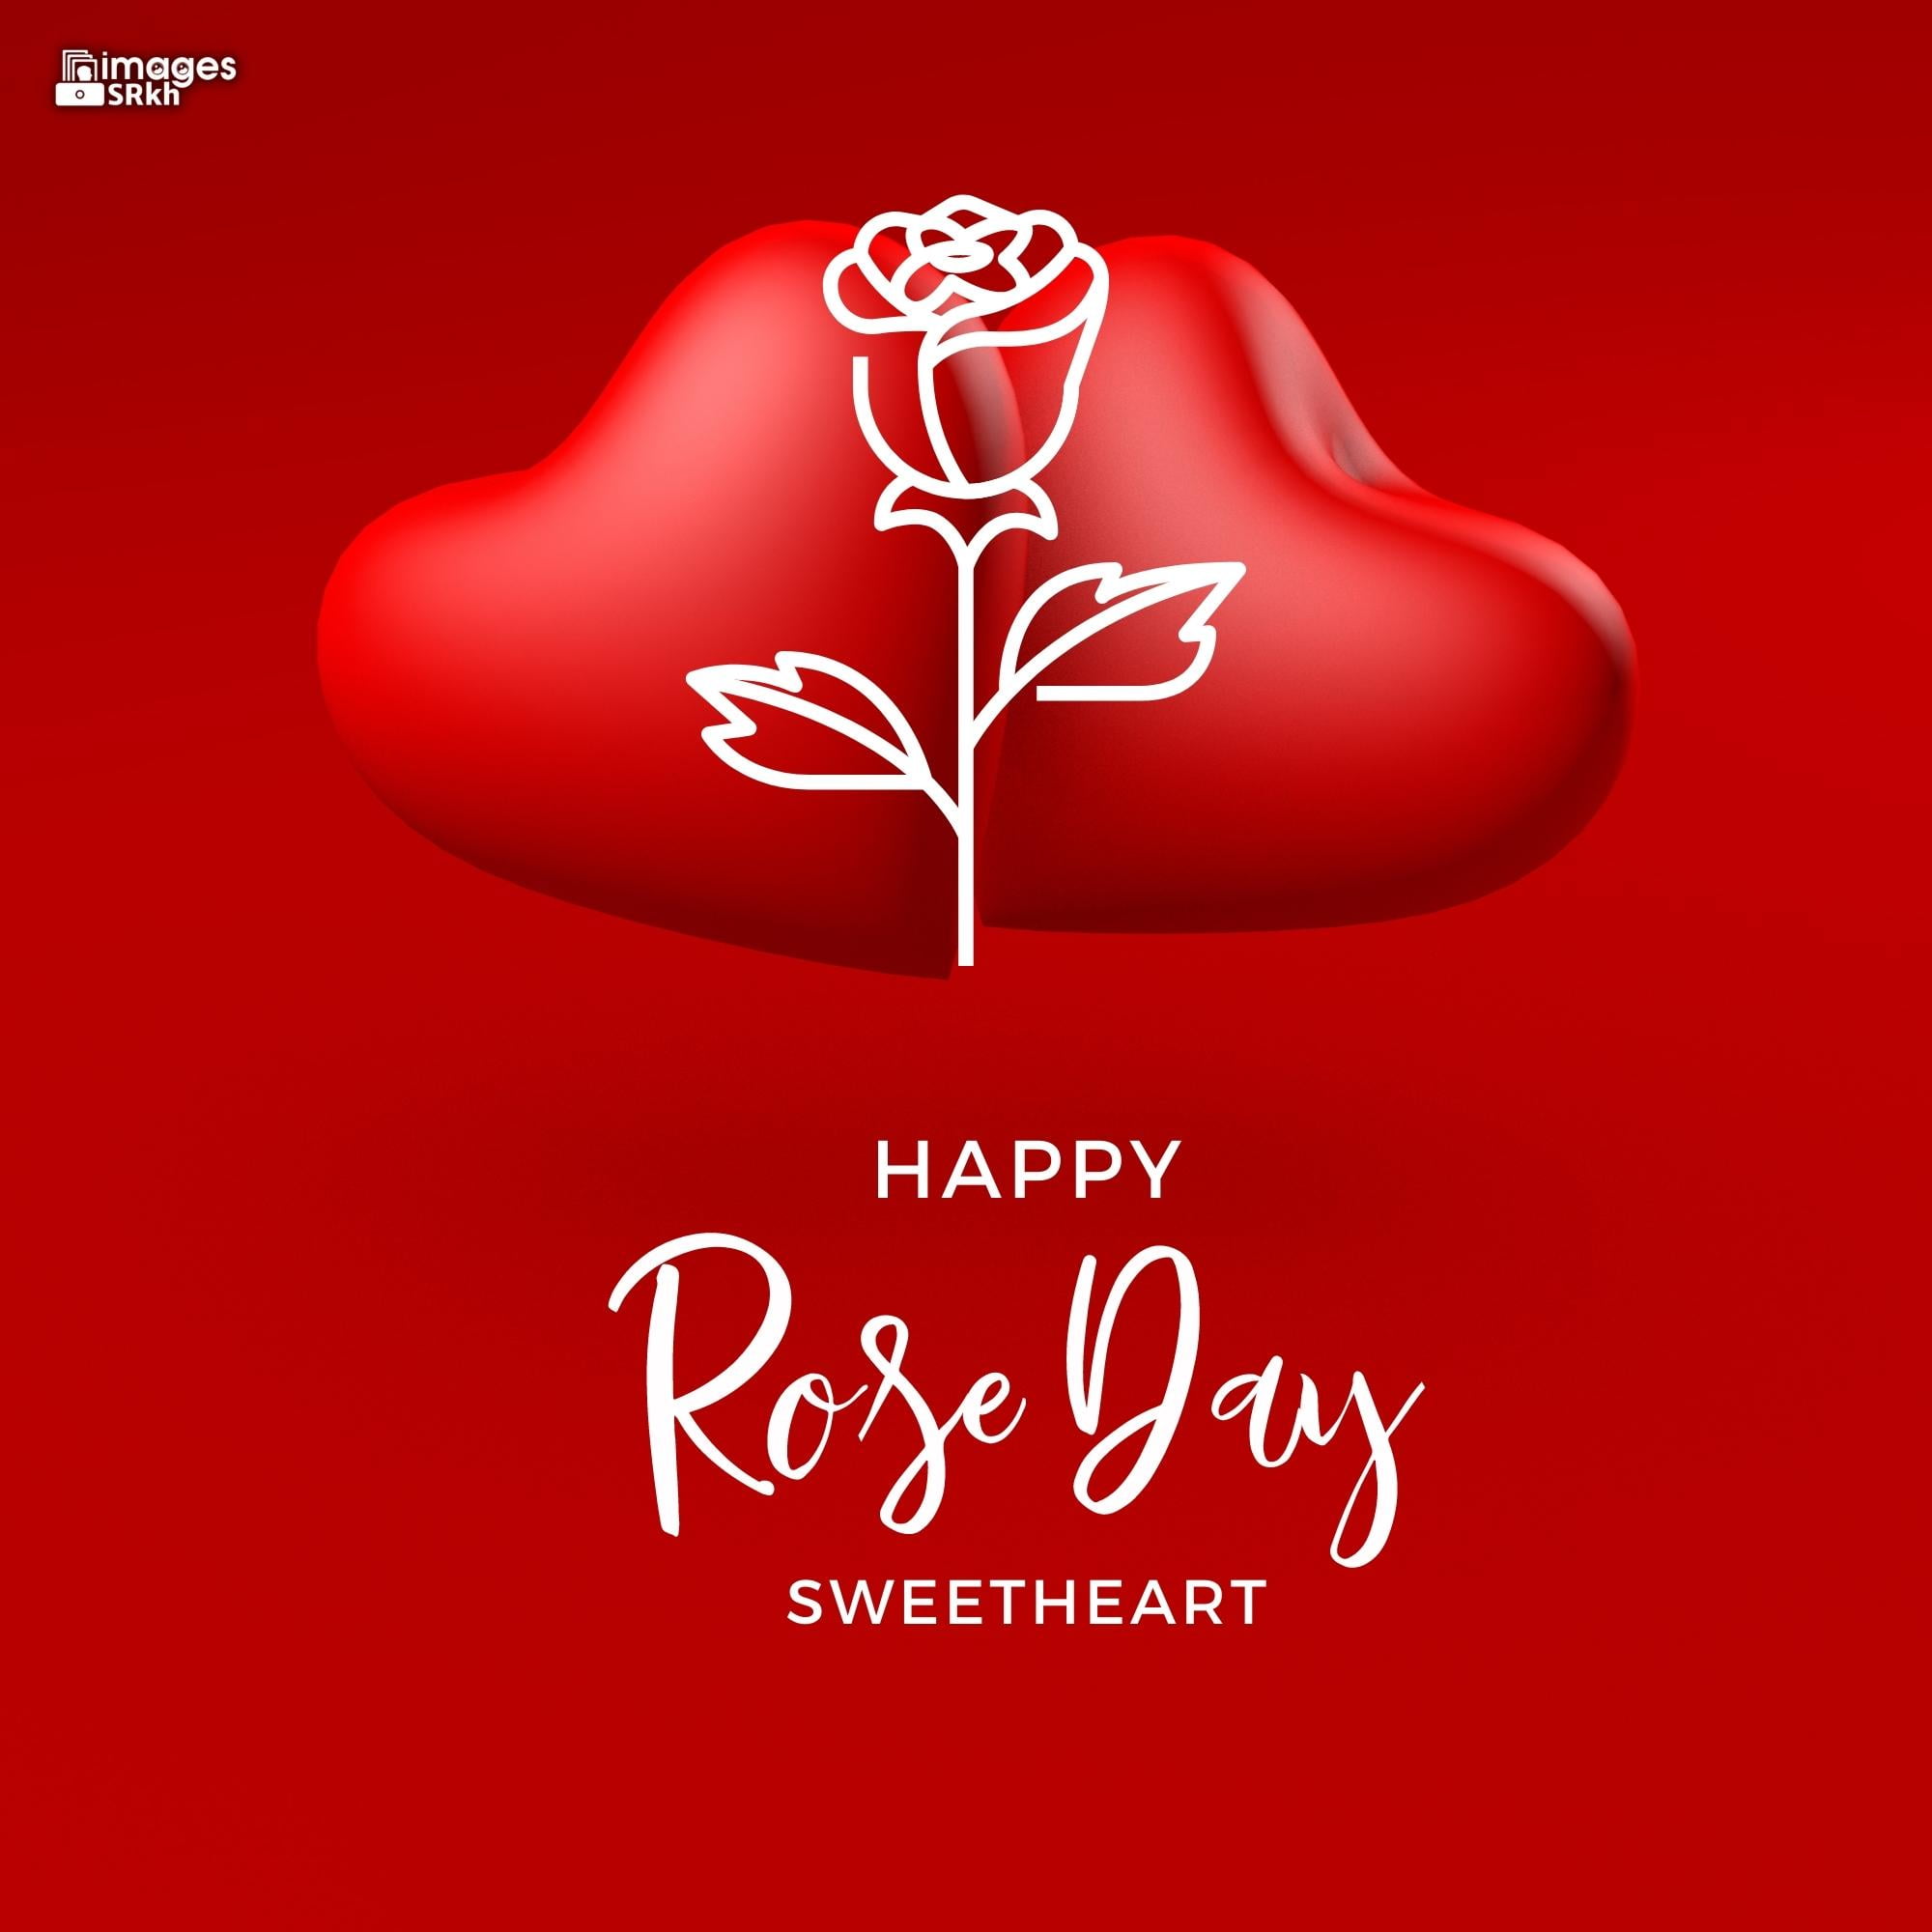 Happy Rose Day Image Hd Download 99